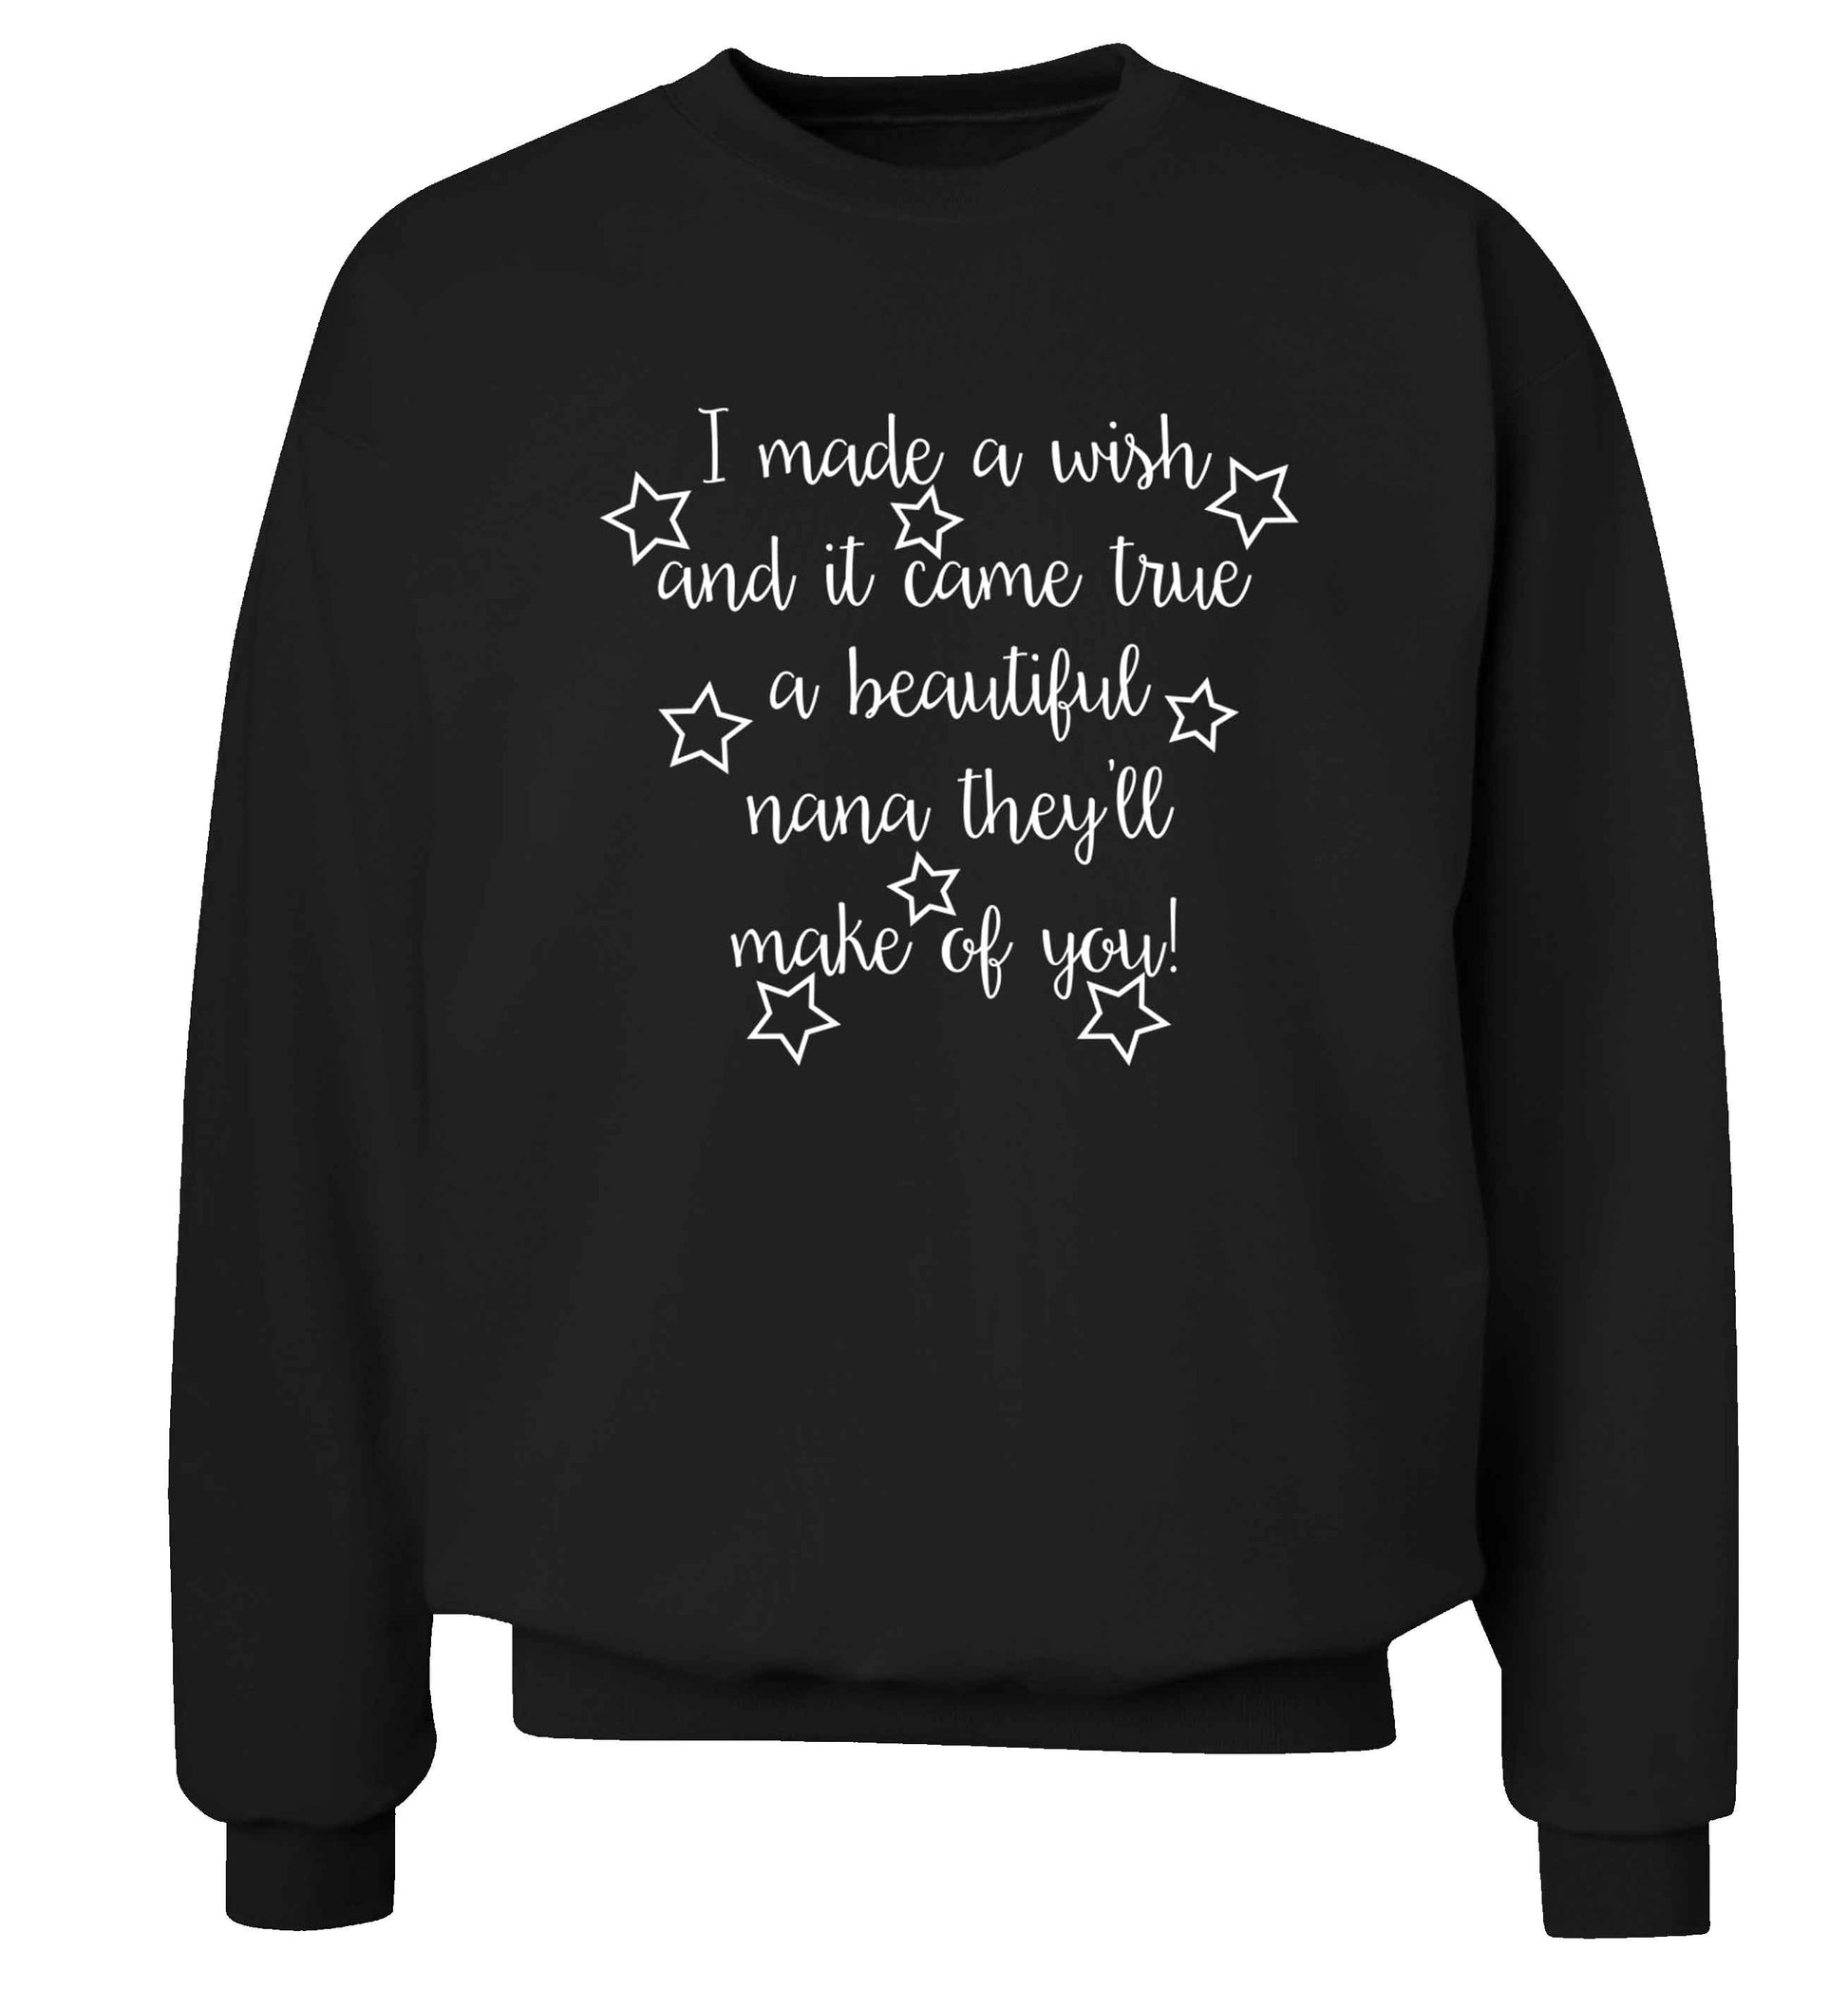 I made a wish and it came true a beautiful nana they'll make of you! Adult's unisex black Sweater 2XL